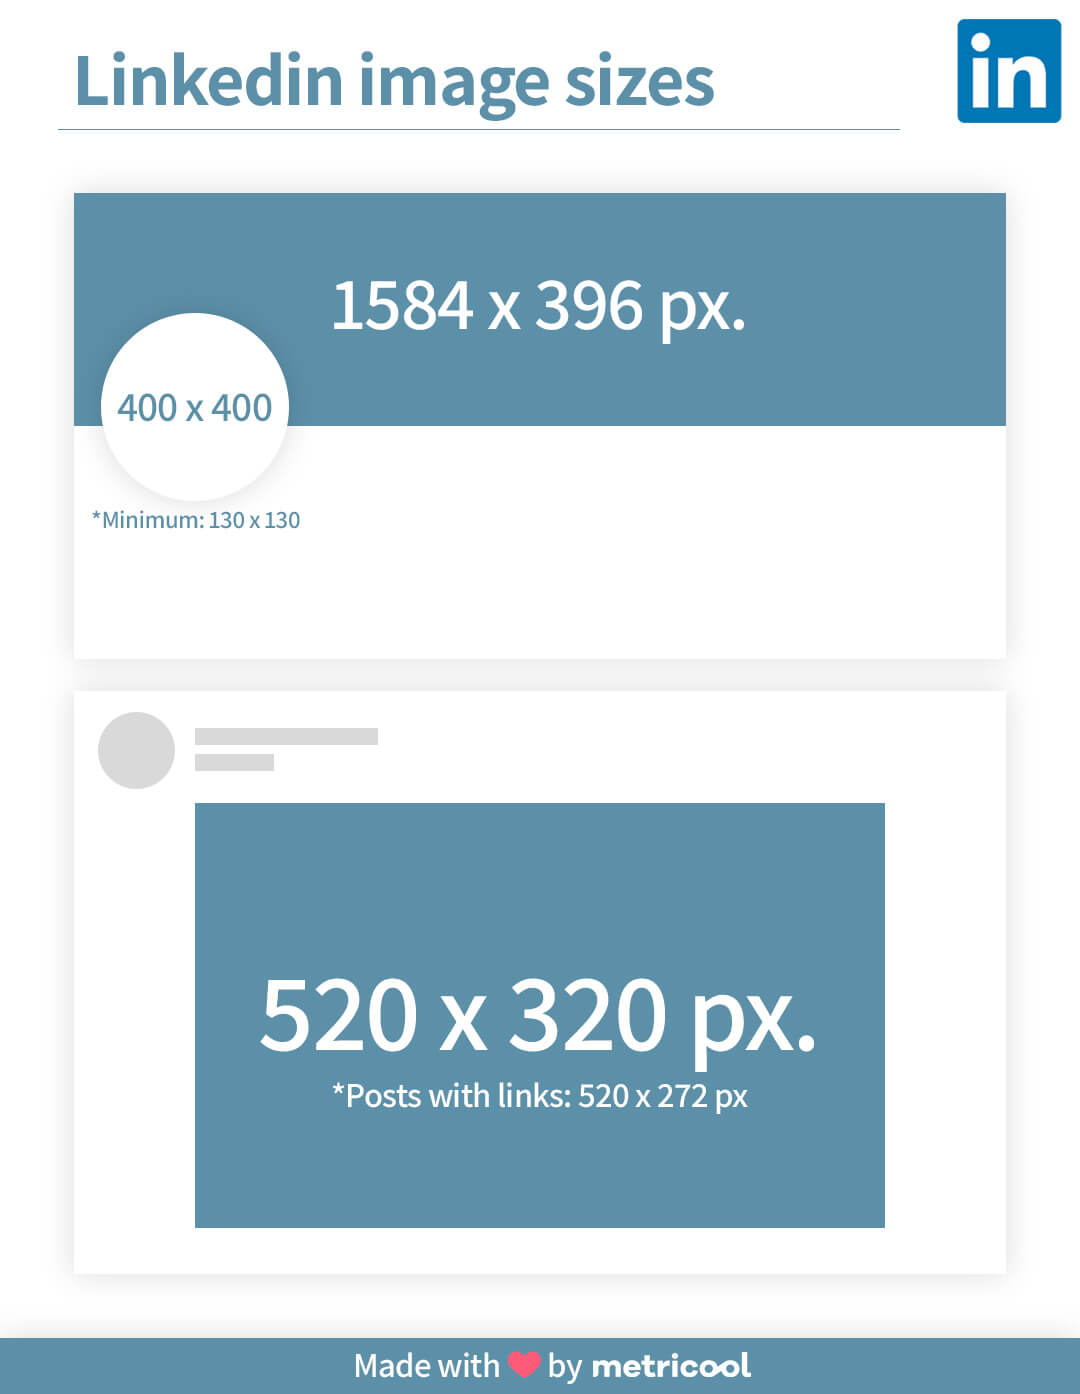 Image Sizes On Linkedin The Correct Dimensions 2018 Now, i know for many of you. image sizes on linkedin the correct